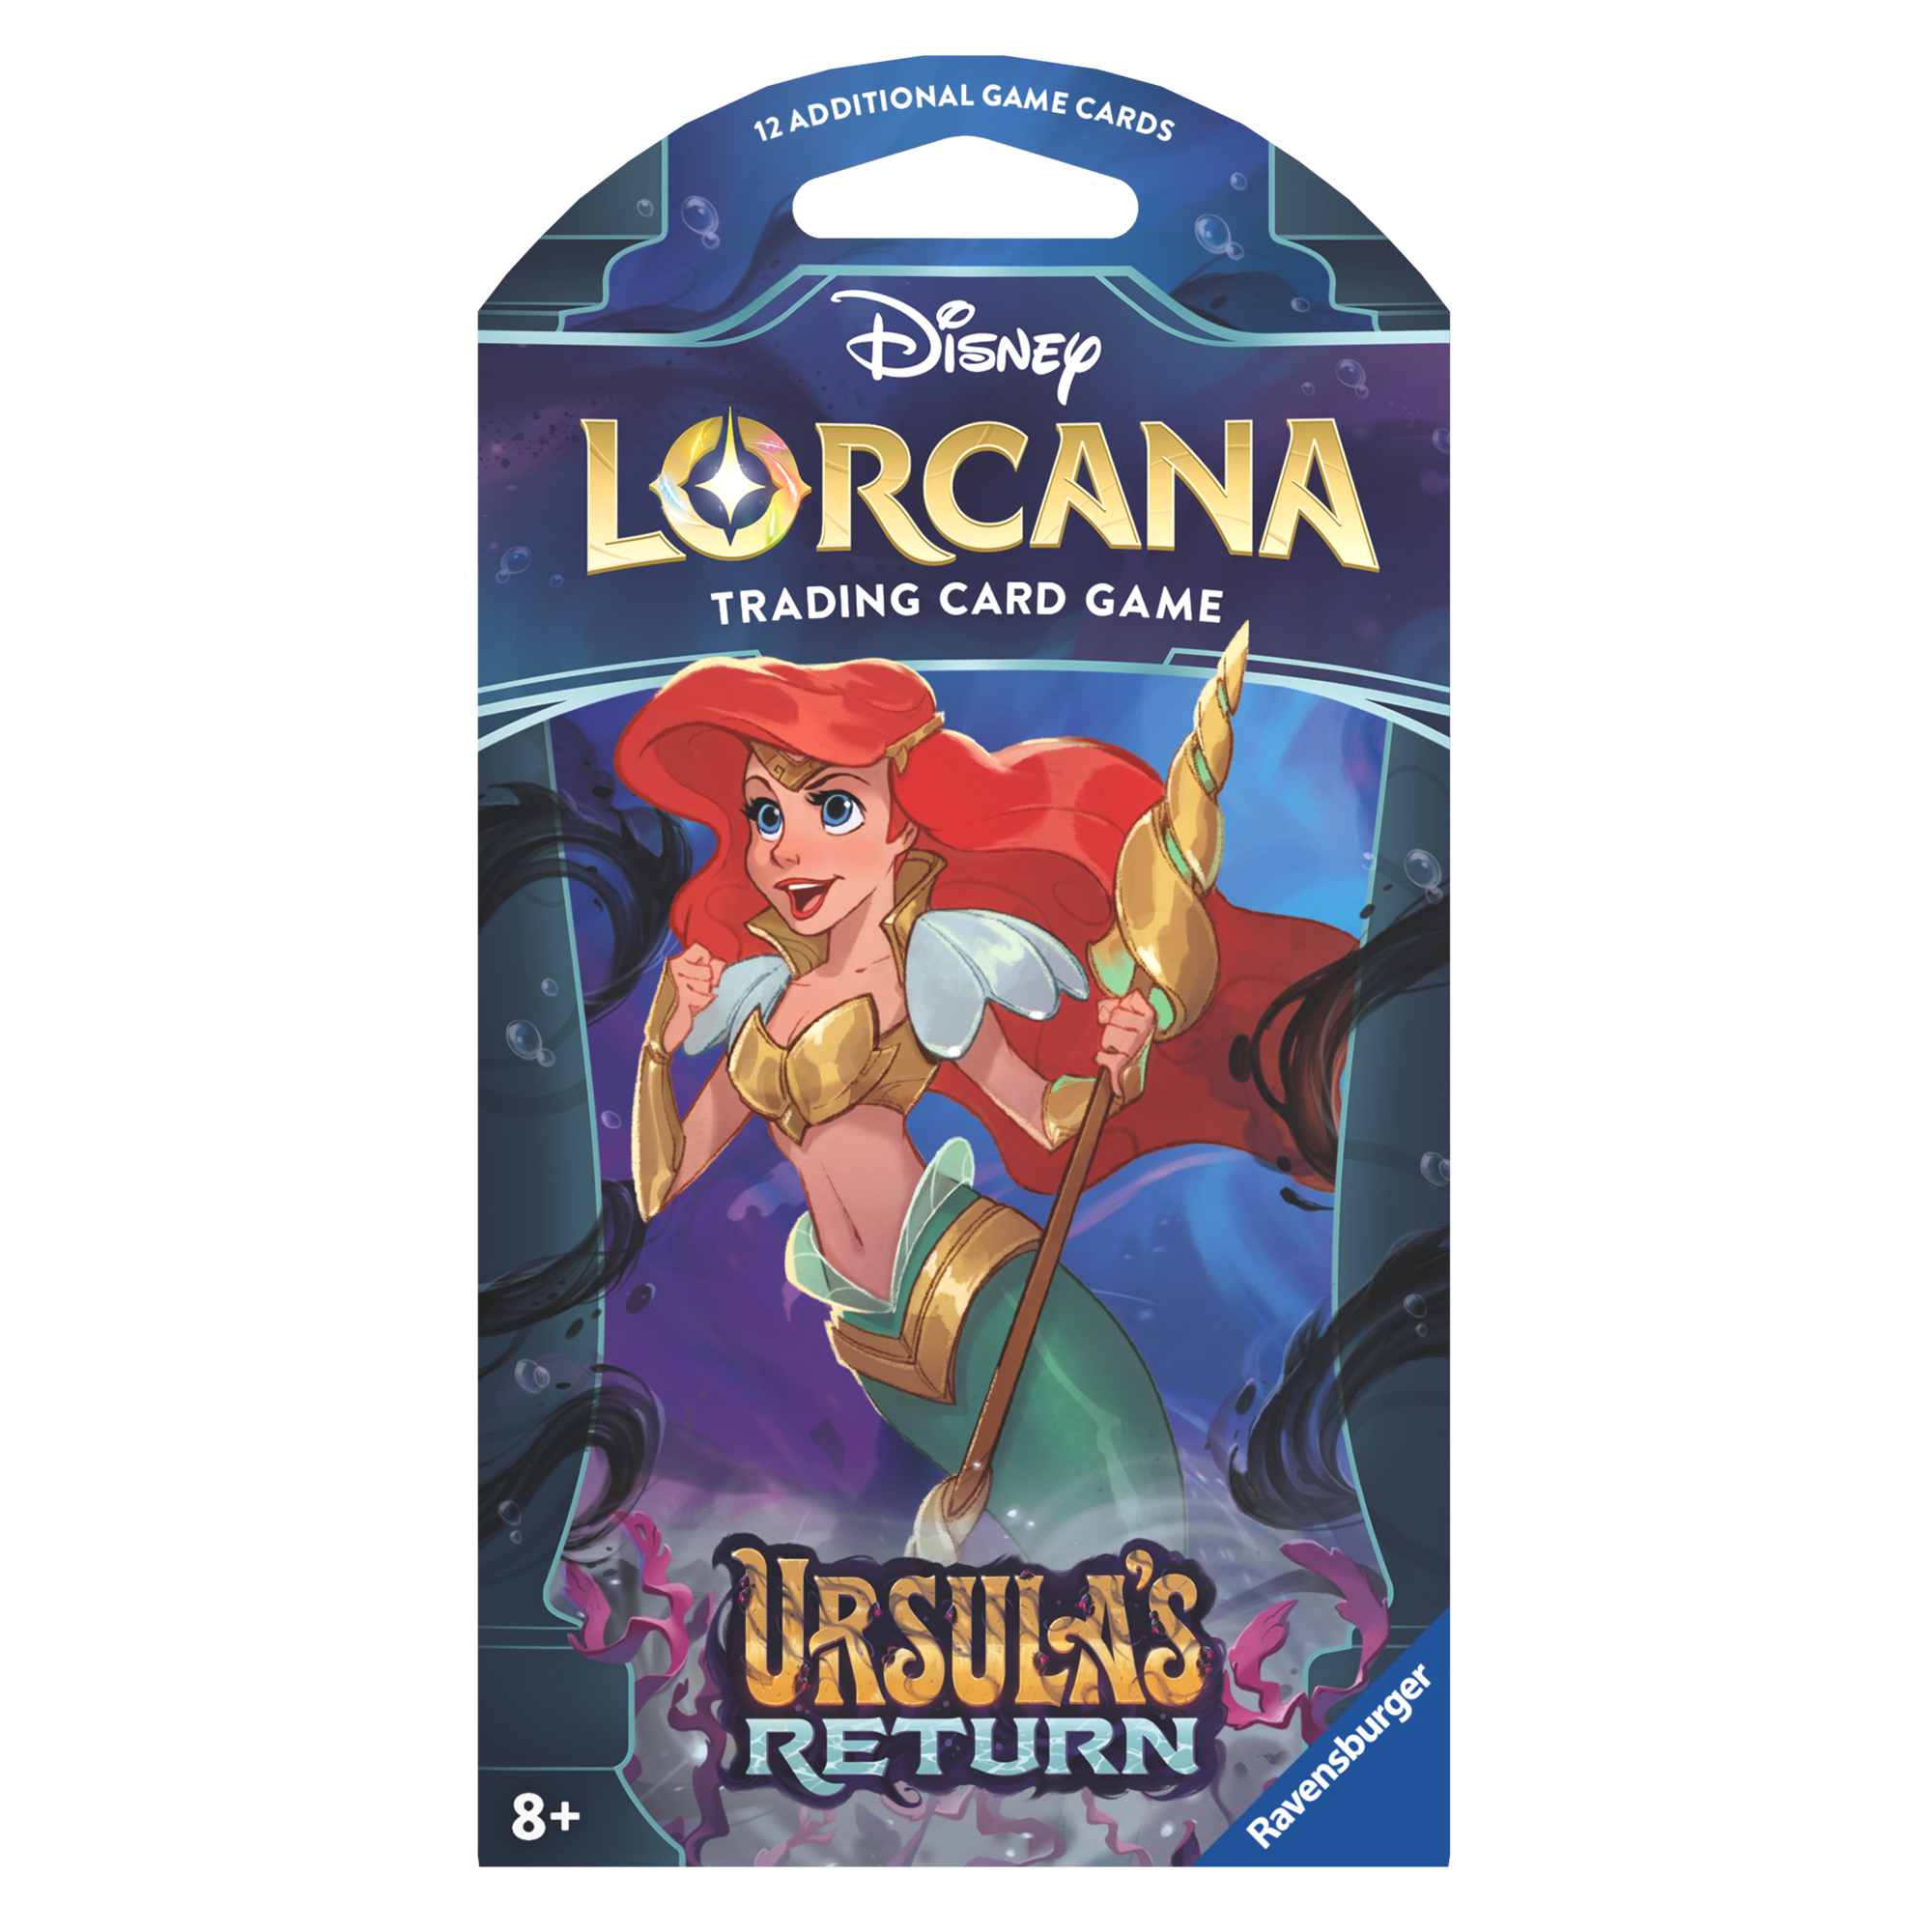 Disney Lorcana Trading Card Game: Chapter 4 Ursula's Return Booster Pack (Styles May Vary)